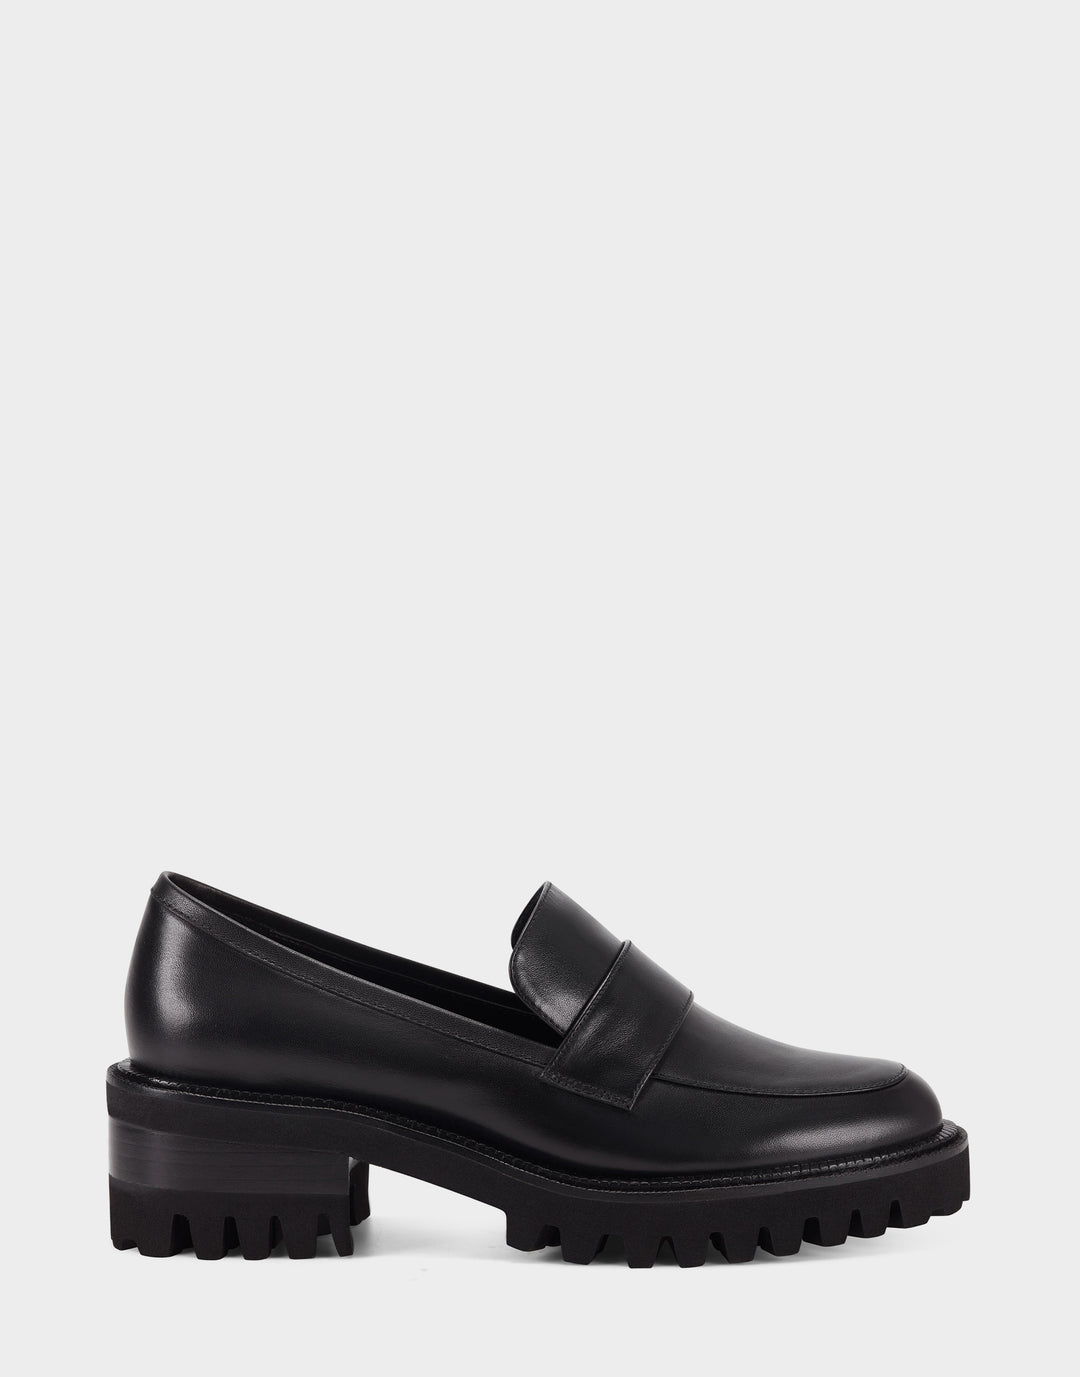 Ronnie - comfortable women's loafers in black